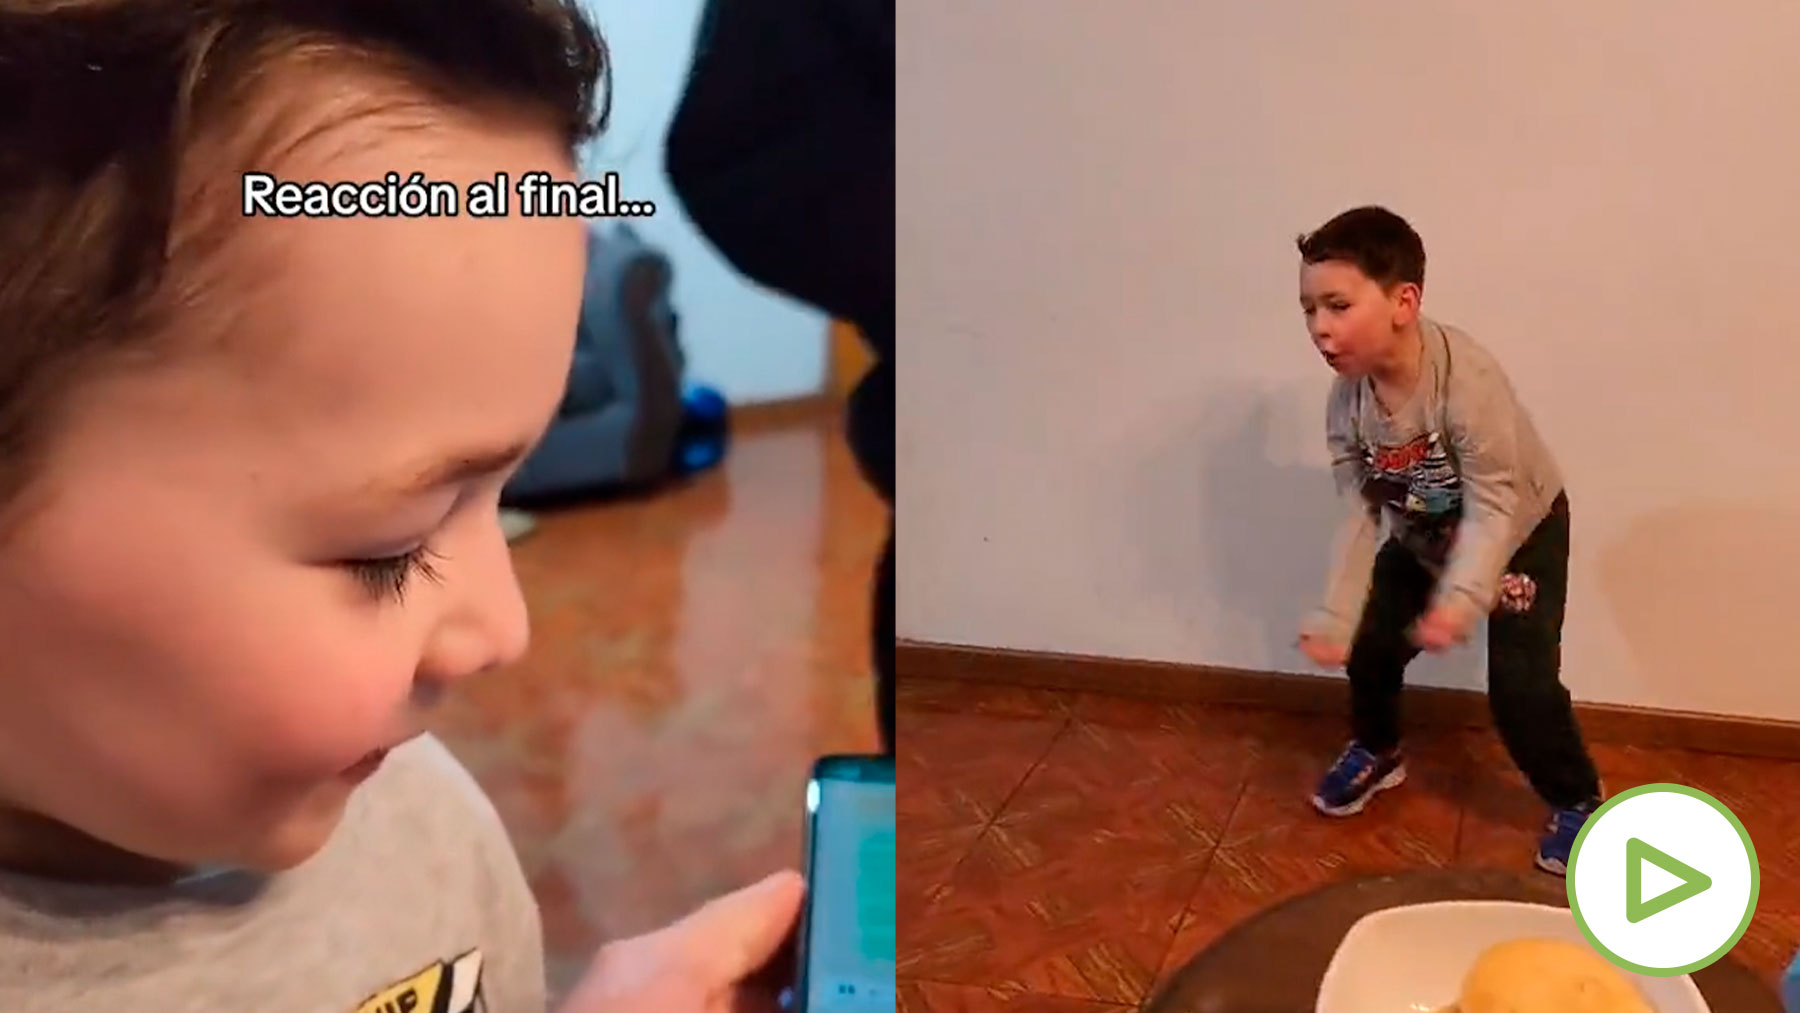 Viral Video: Child Gets False Congratulation from Cristiano Ronaldo AI – Emotional Moment Goes Viral on Social Networks